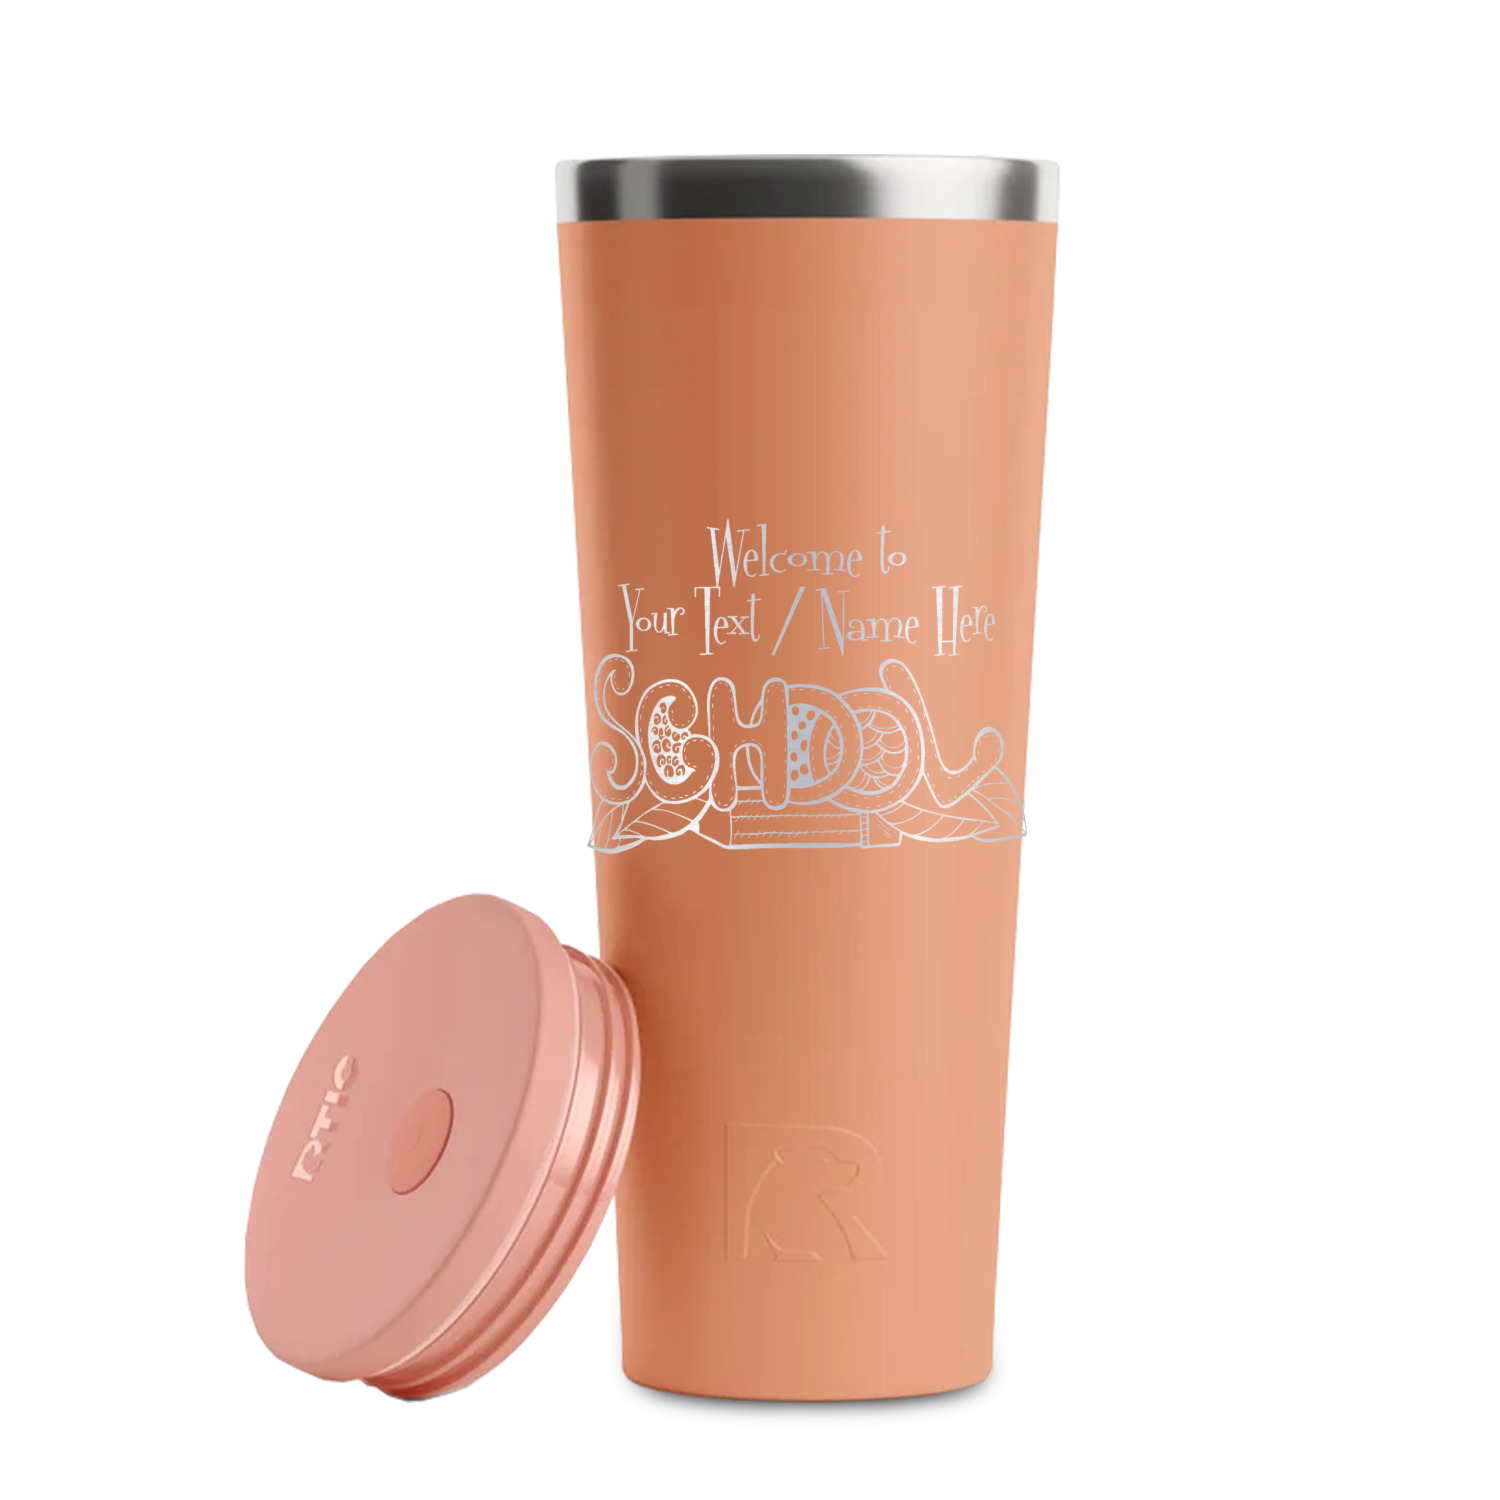 https://www.youcustomizeit.com/common/MAKE/2463811/Welcome-to-School-Peach-RTIC-Everyday-Tumbler-28-oz-Lid-Off.jpg?lm=1698263802